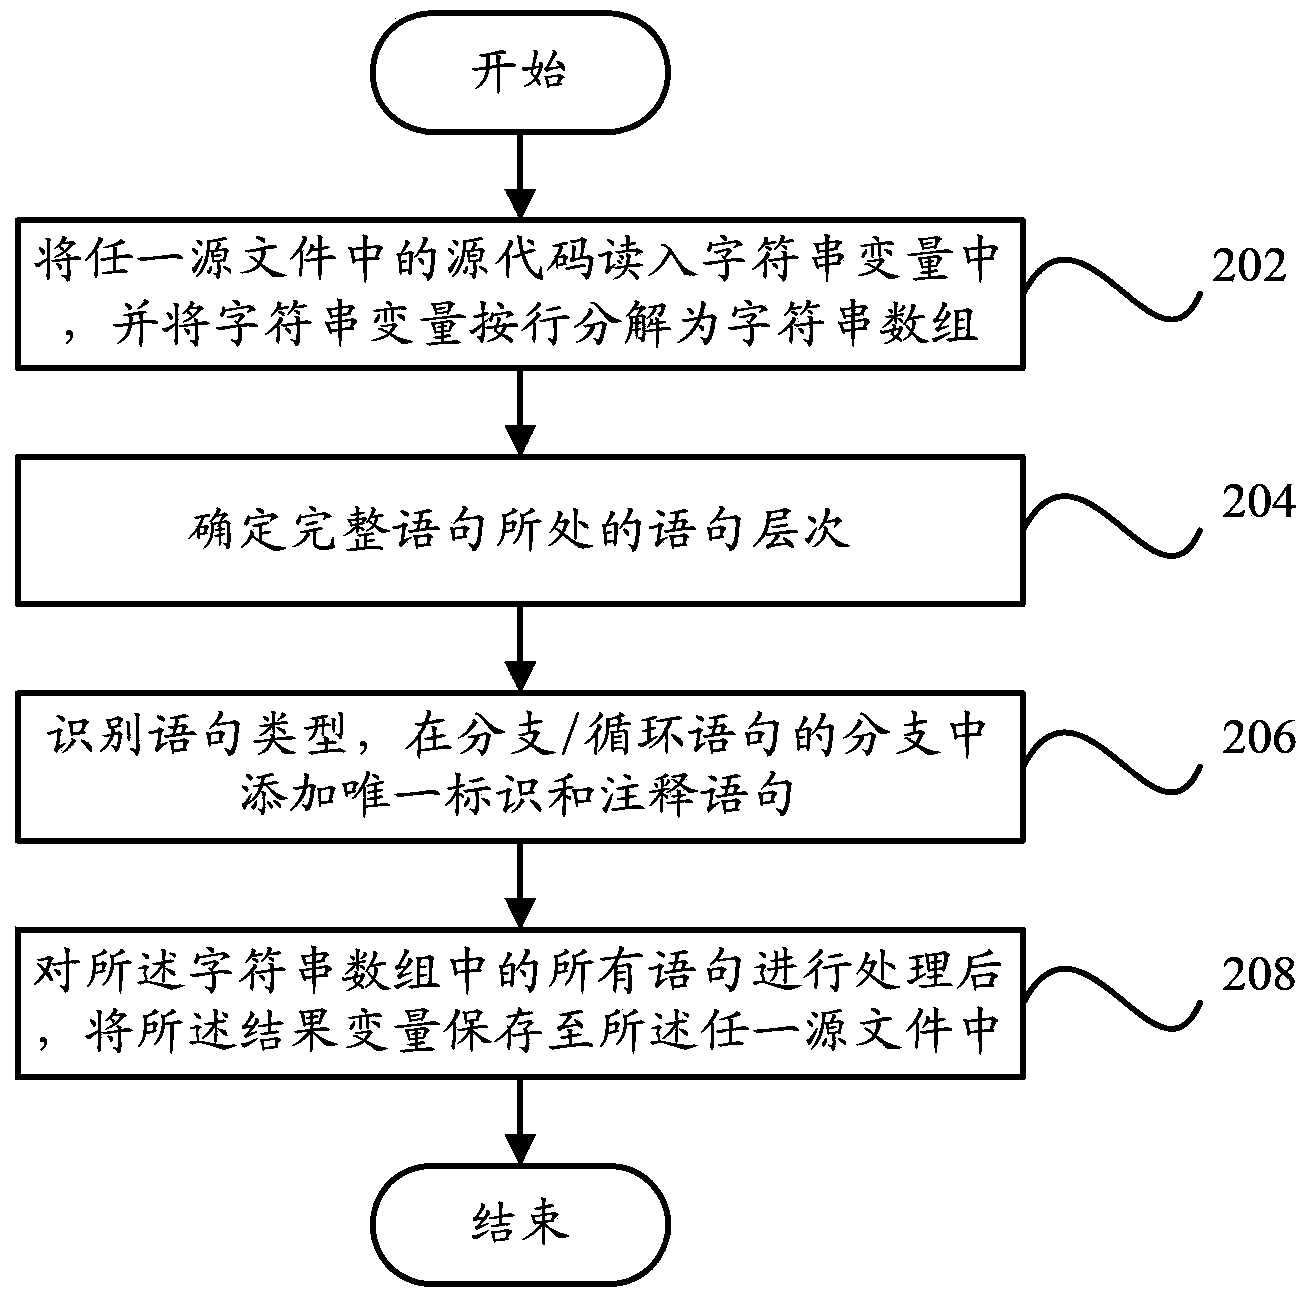 System and method for automatically marking source code